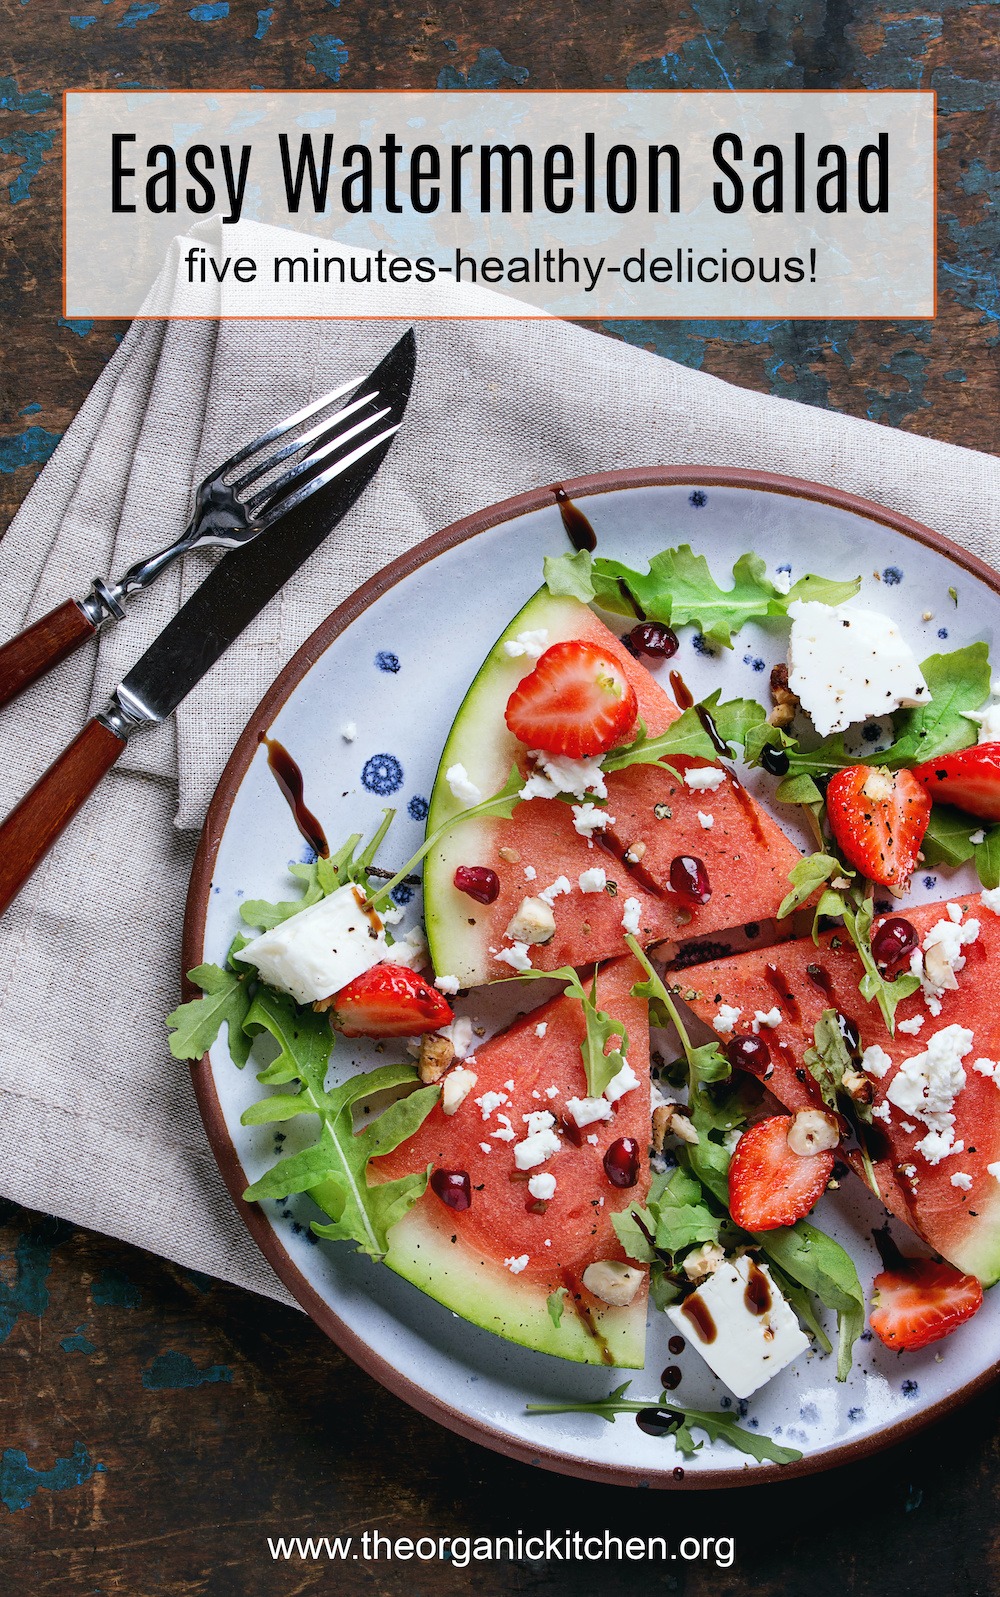 Easy Watermelon Salad with feta and greens on blue plate